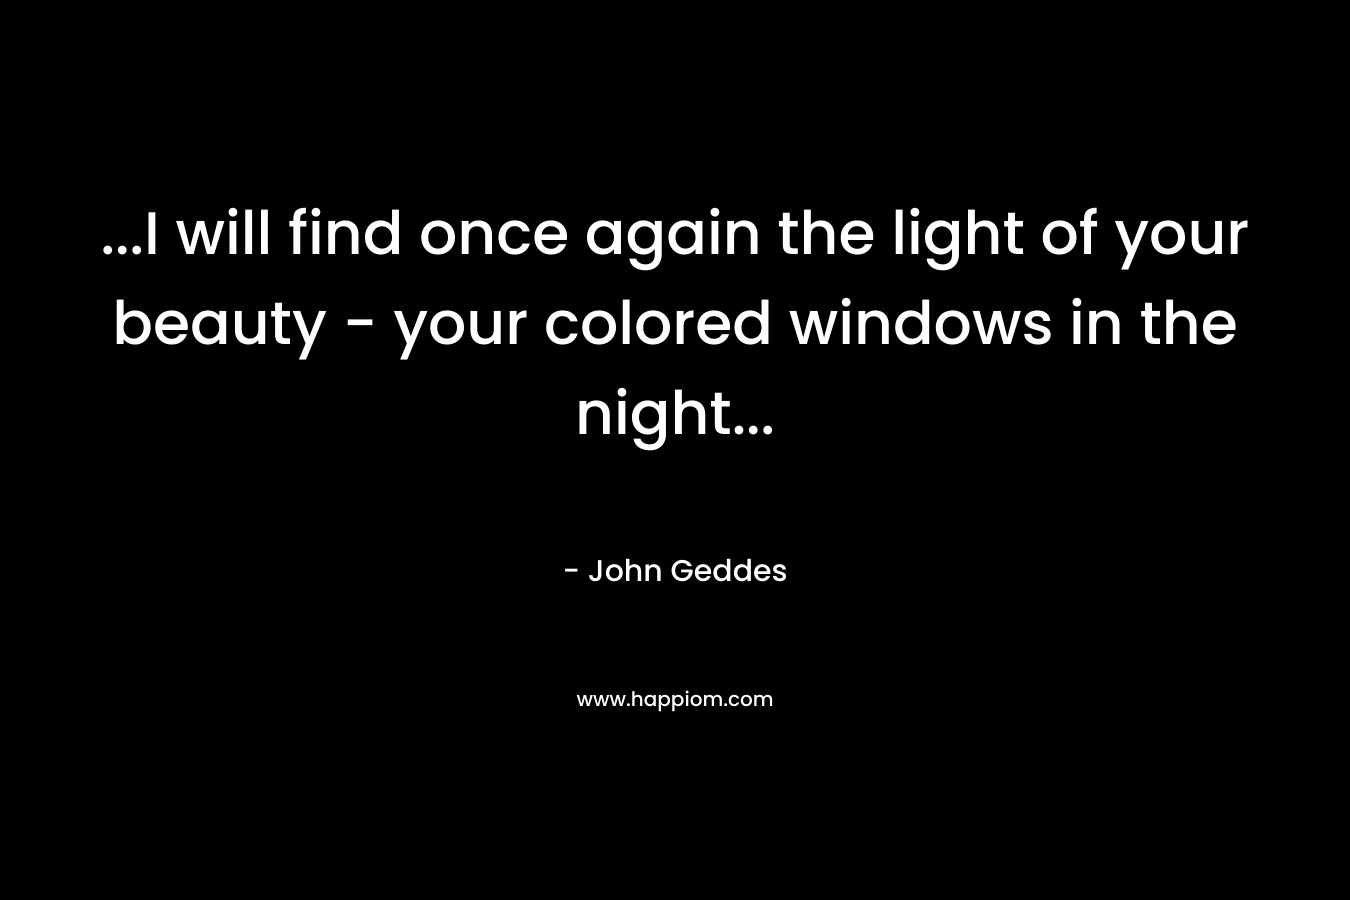 ...I will find once again the light of your beauty - your colored windows in the night...